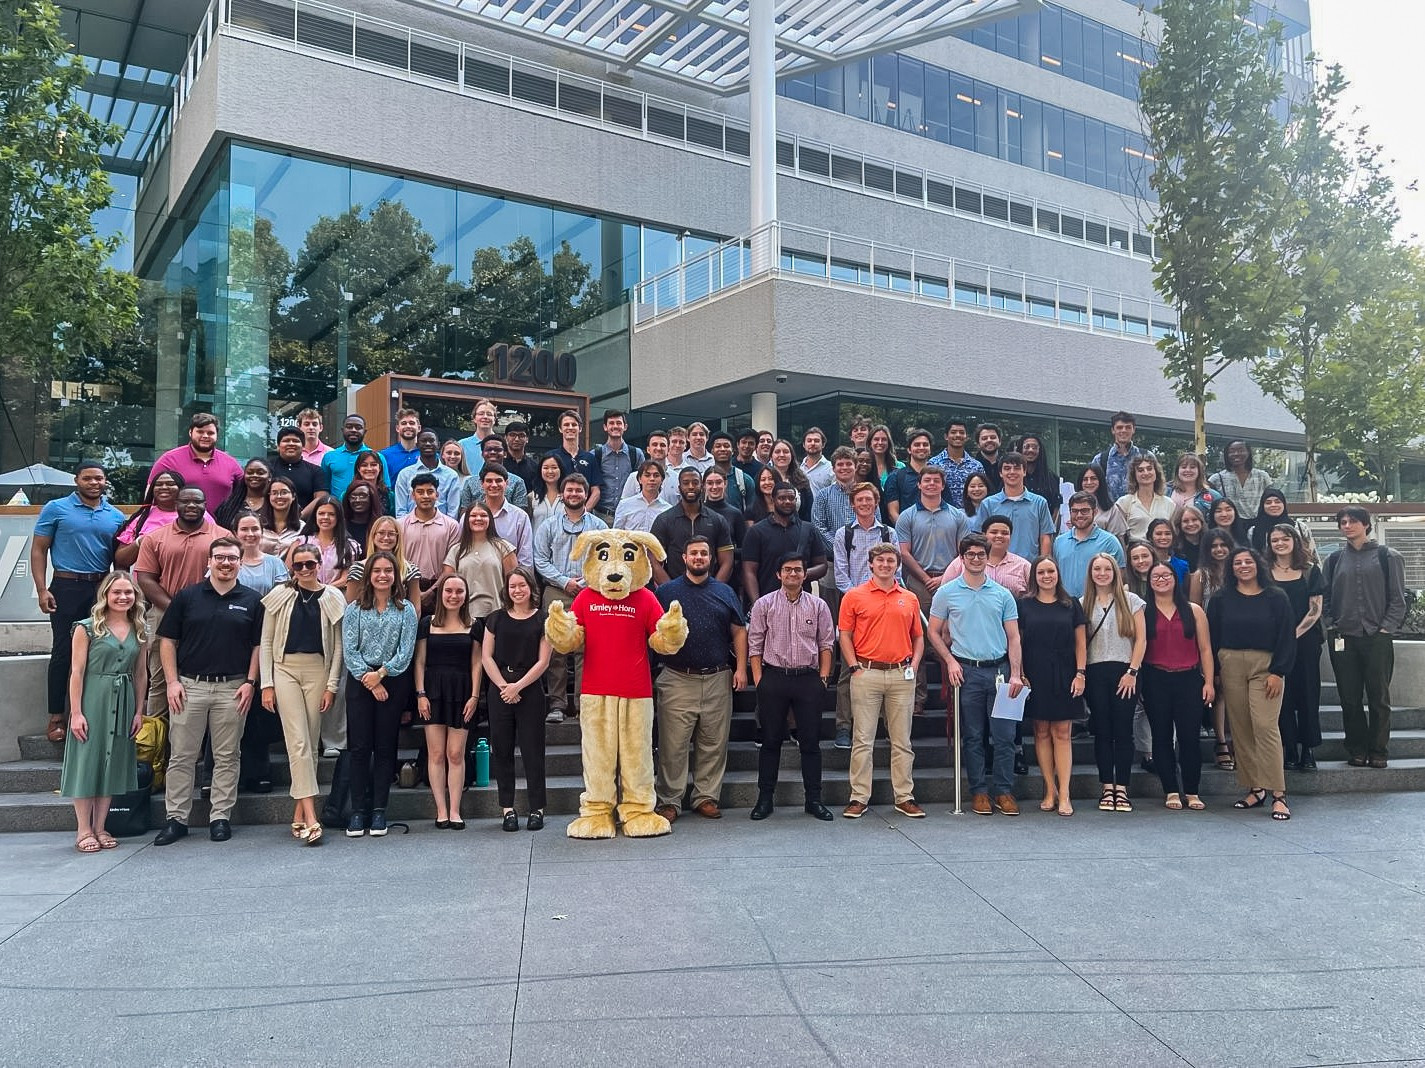 Our summer interns pose with everyone's best friend, Scrappy, on South's Intern Day.